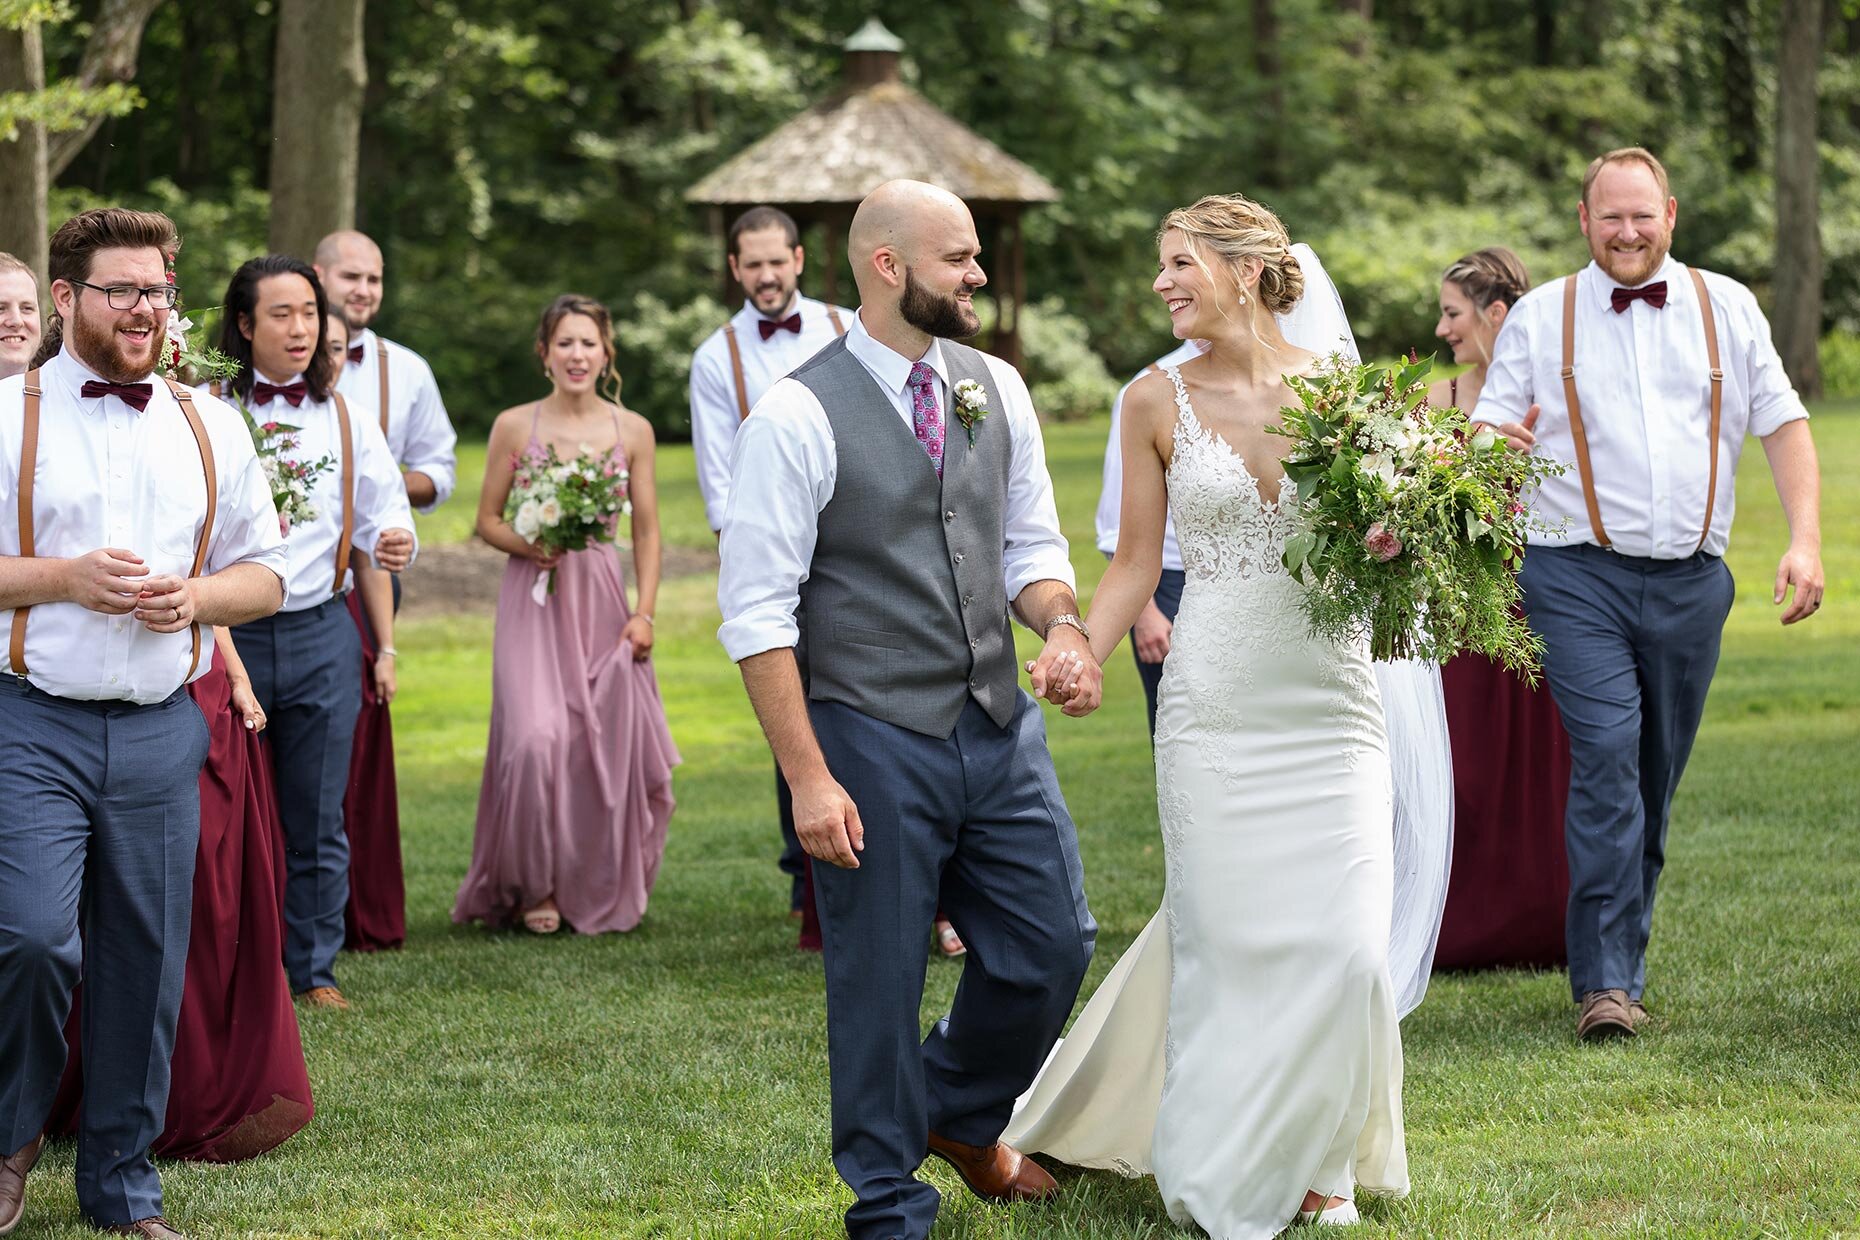 Candid of Bride and groom walking with bridal party 